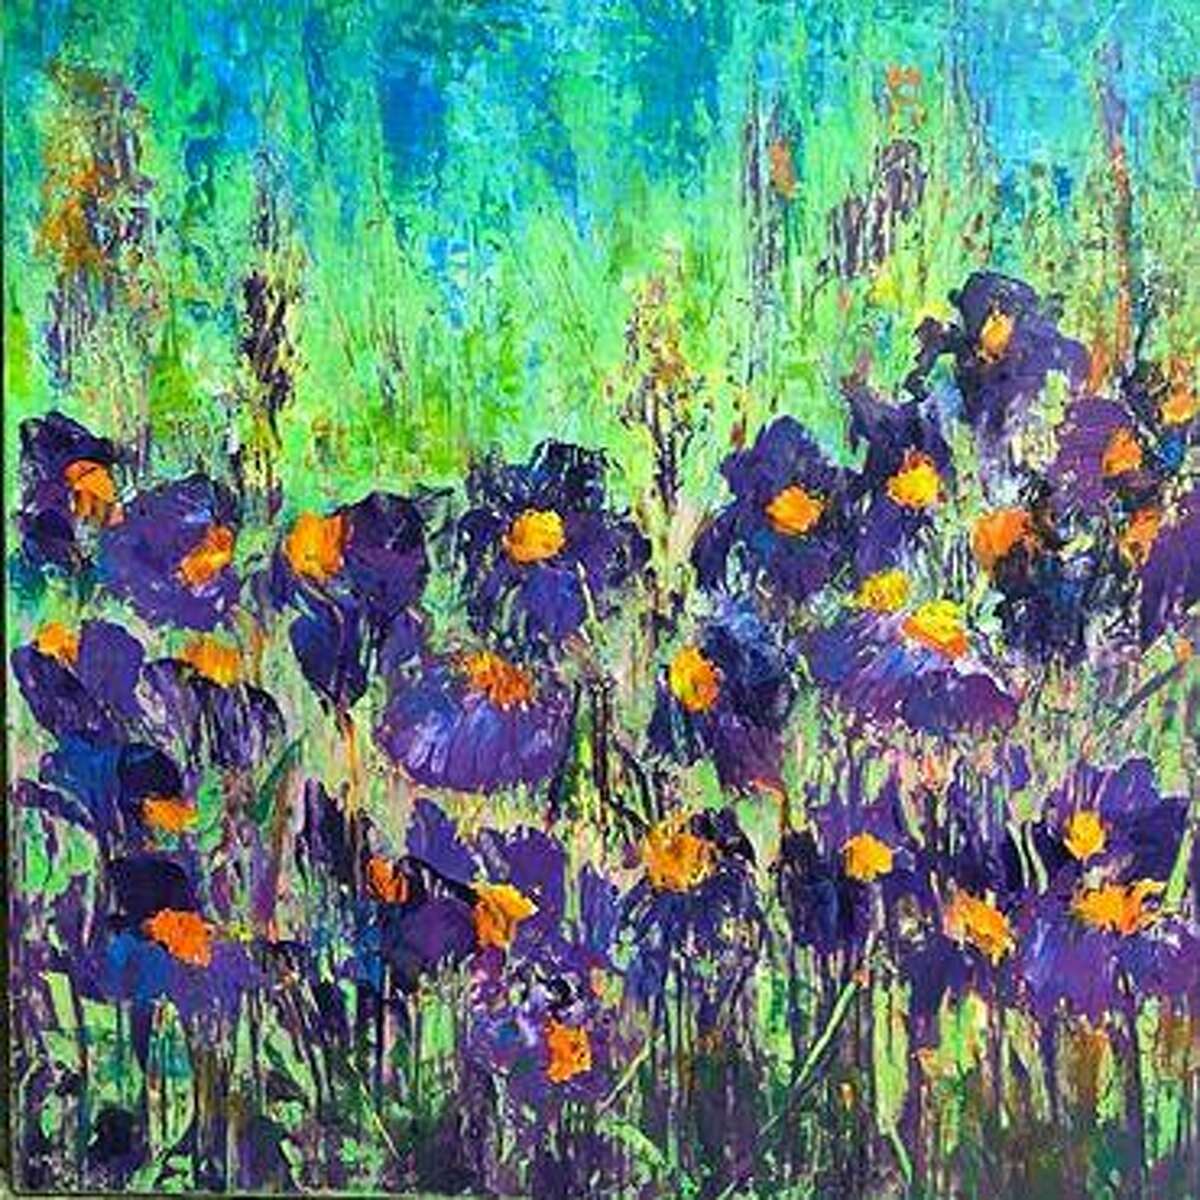 A mixed media painting titled "Flowers by the River" by Wendy Moreland, which is a sample of the artwork she will be exhibiting throughout the month of July at the Gallery at the Madeley Building, Hillson's Design Services and the Conroe Central Market Gallery in downtown Conroe.